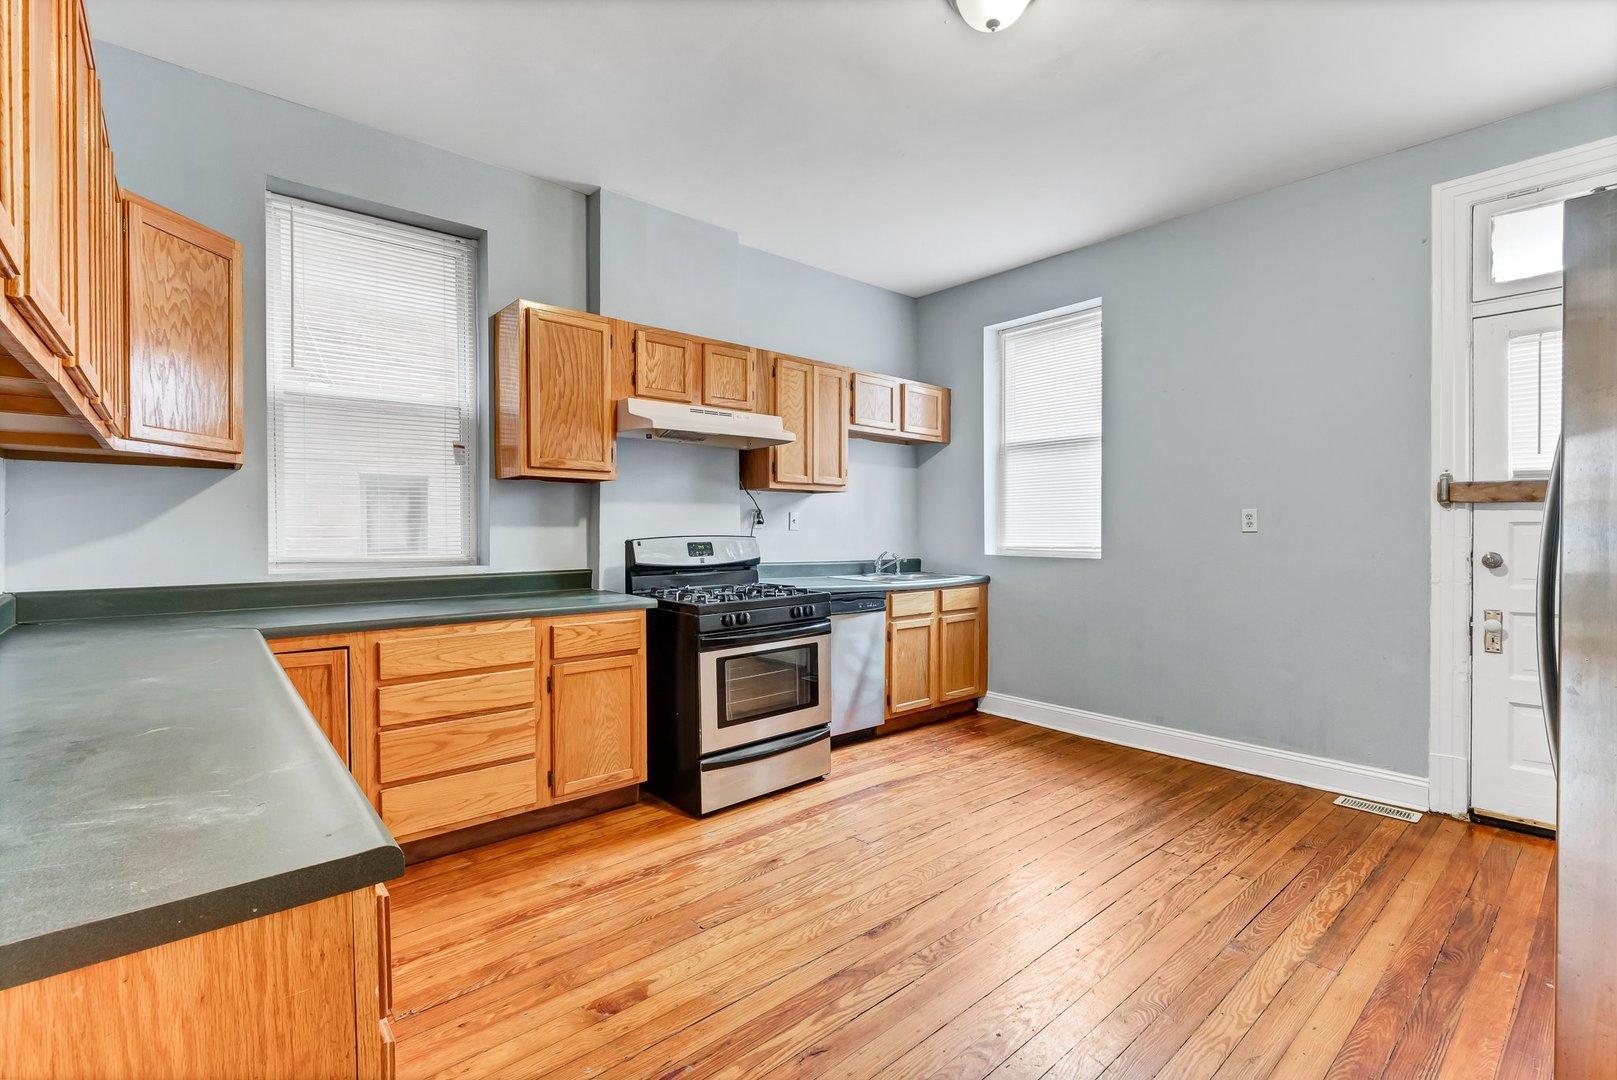 Beautifully Updated Home with 2 Baths, and full basement